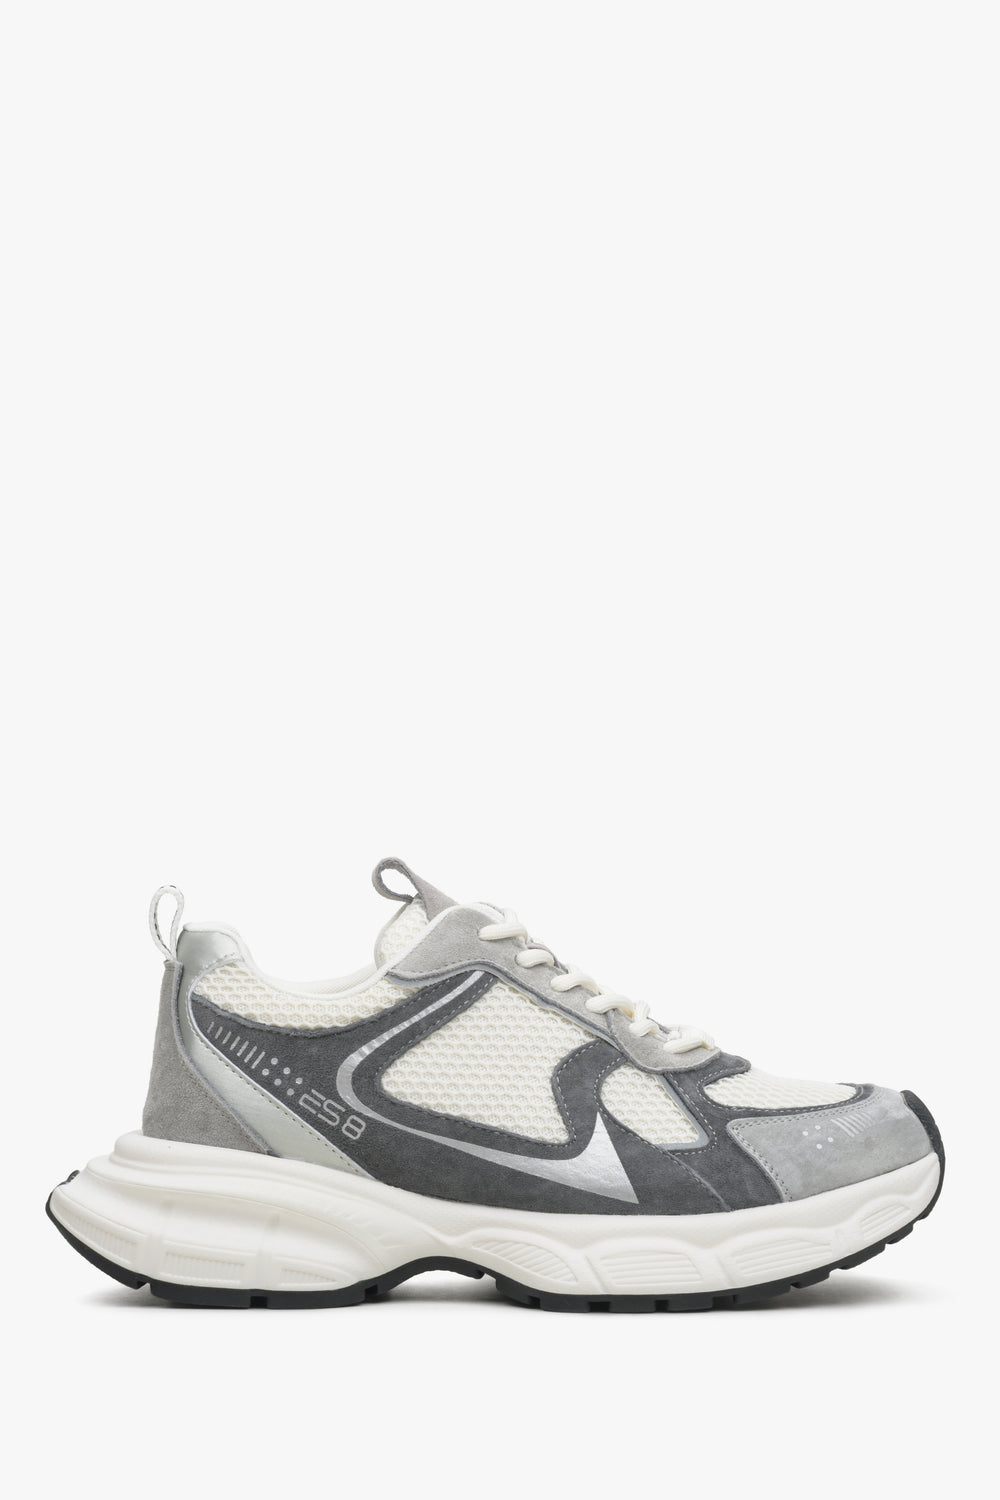 Women's Grey and White Sneakers with a Flexible Sole ES 8 ER00114600.